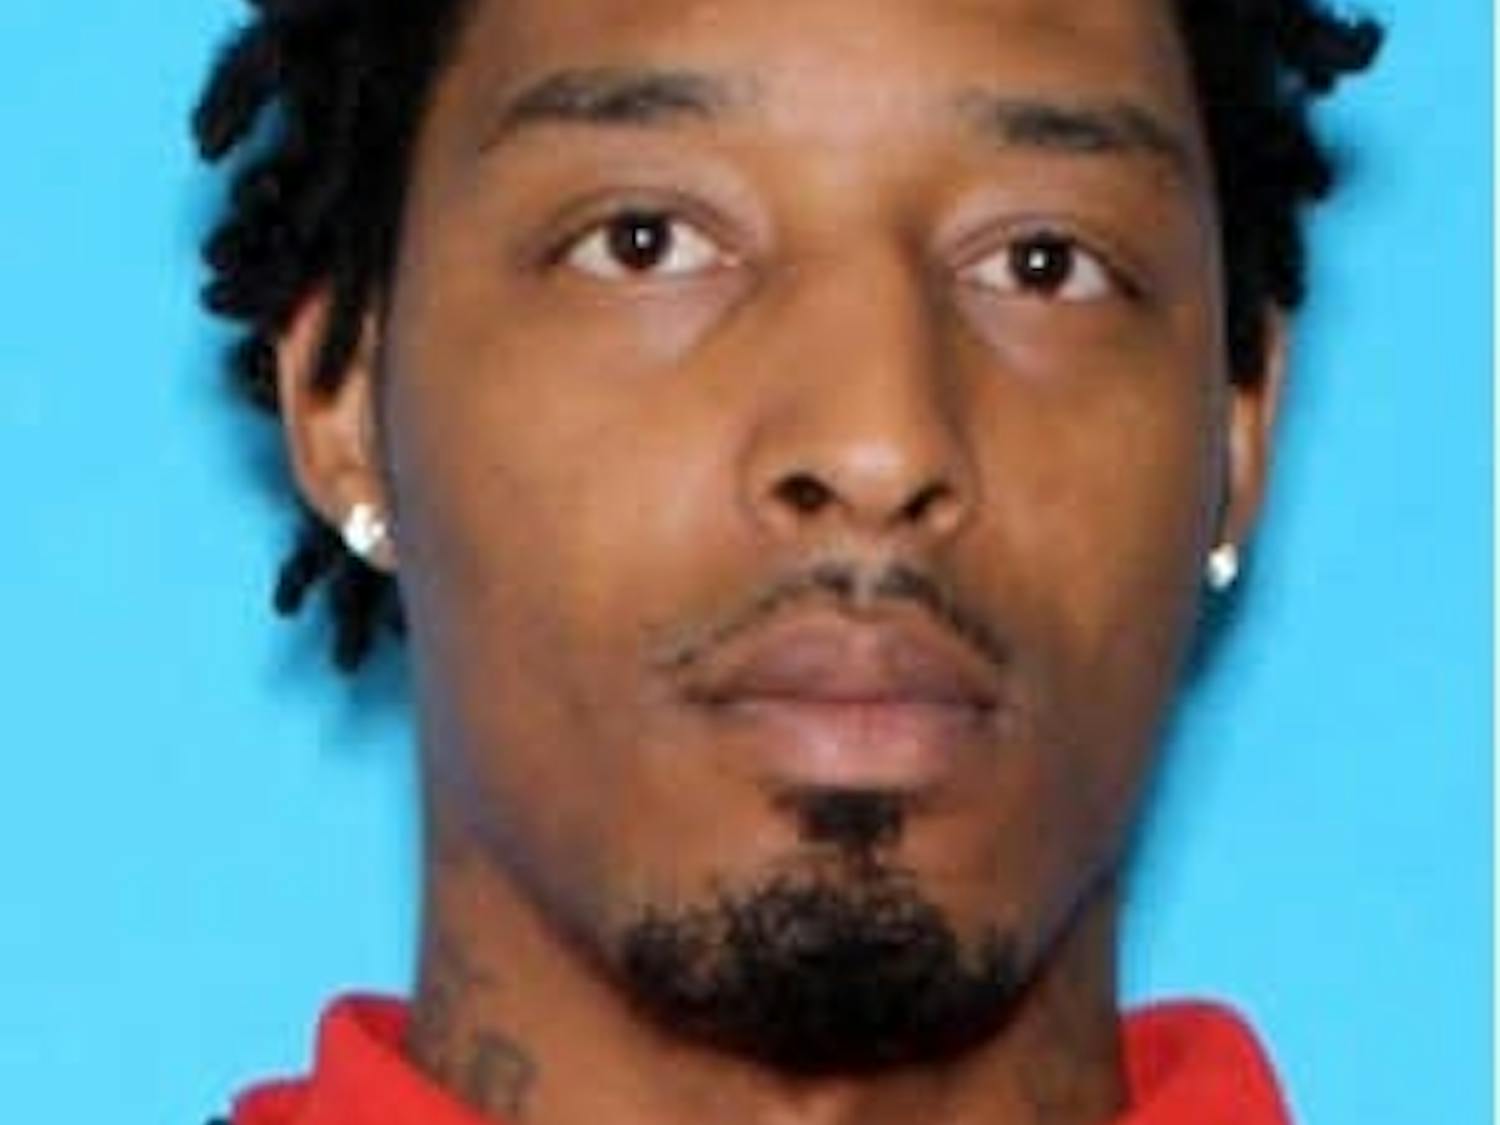 Moses Marques Edwards, 32, was identified by the Opelika Police Department as a murder suspect.